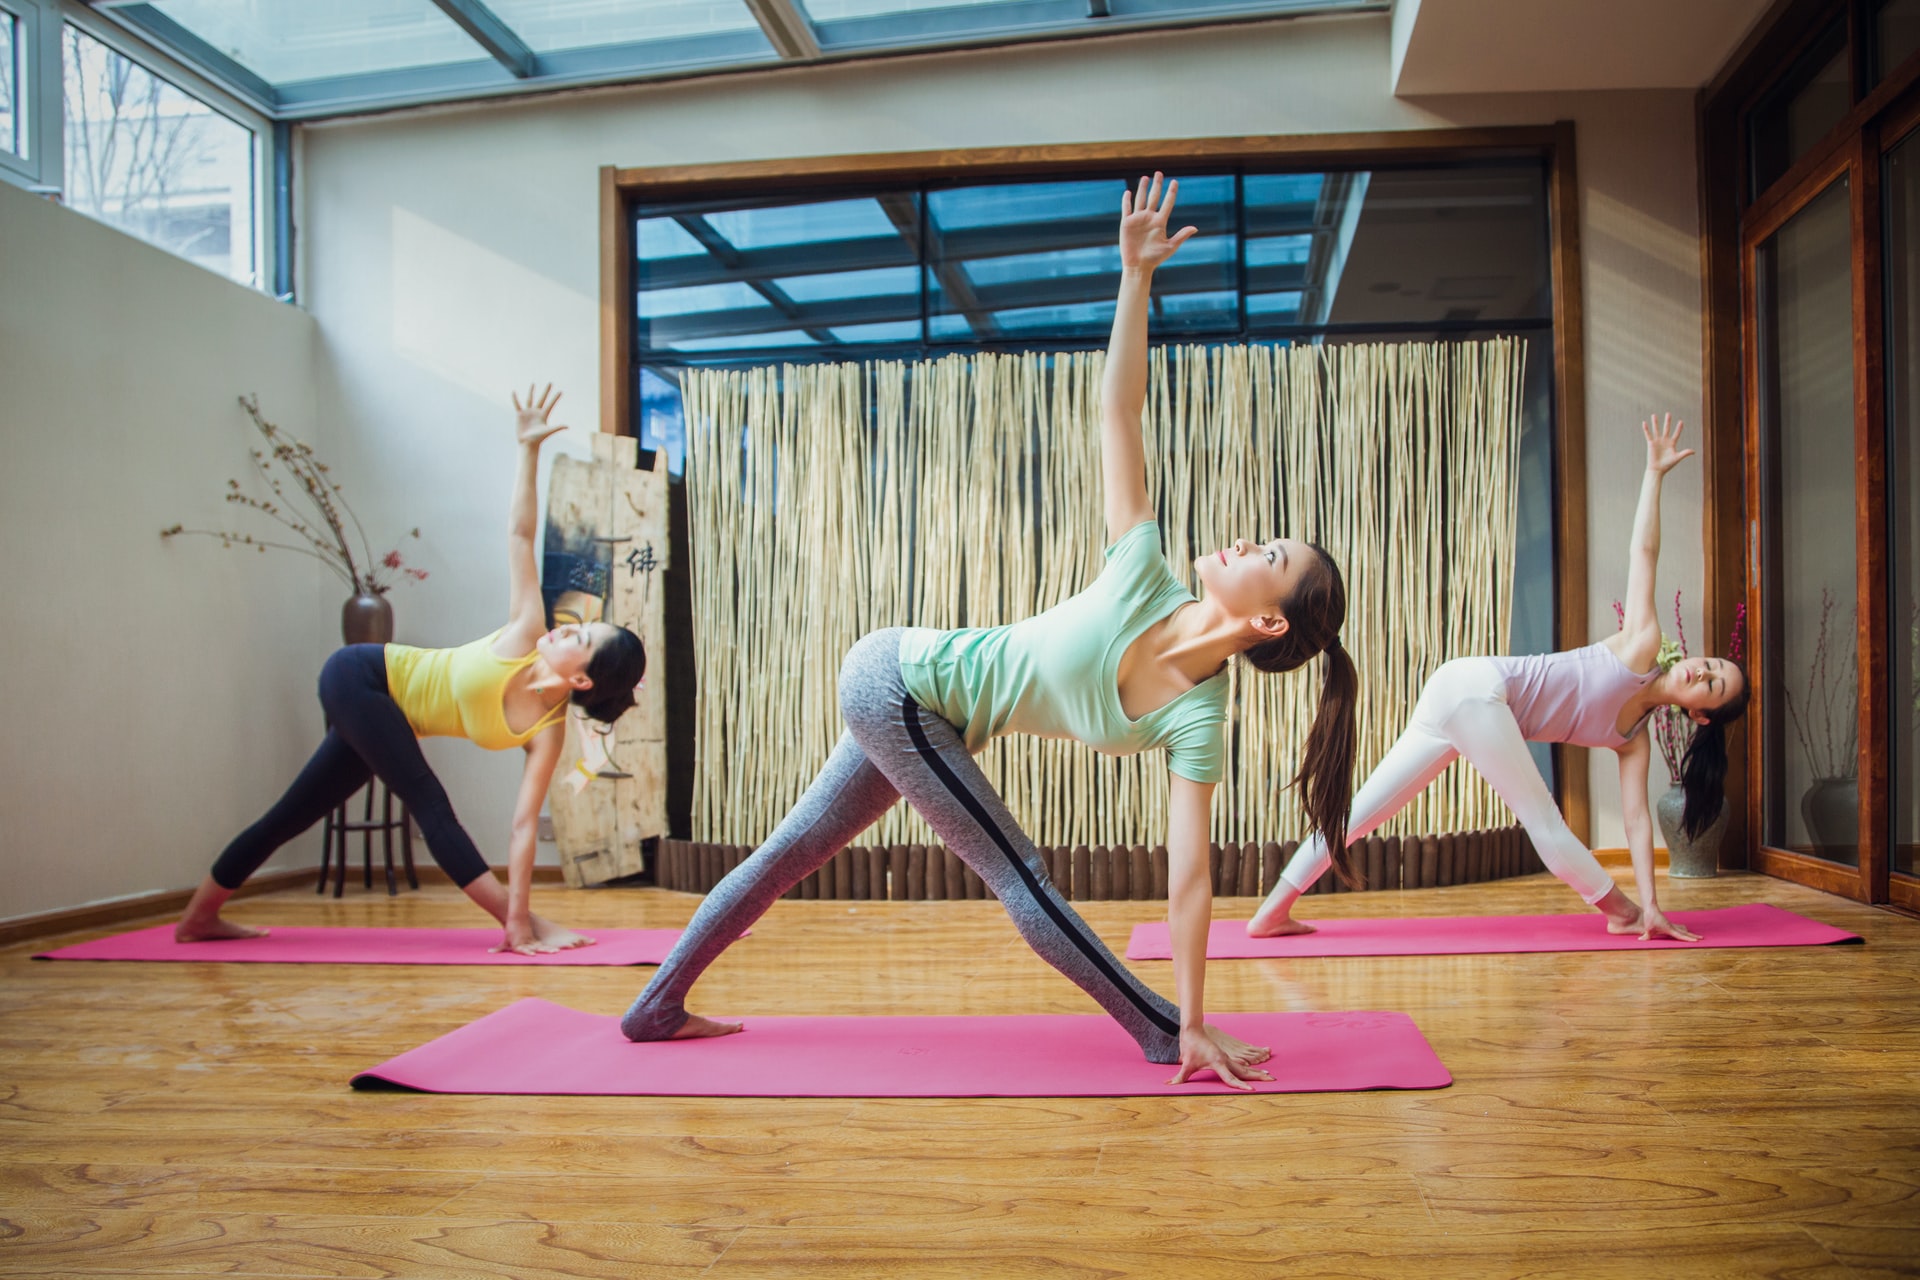 Want to take care of your figure? Here are the best reasons to practice Pilates